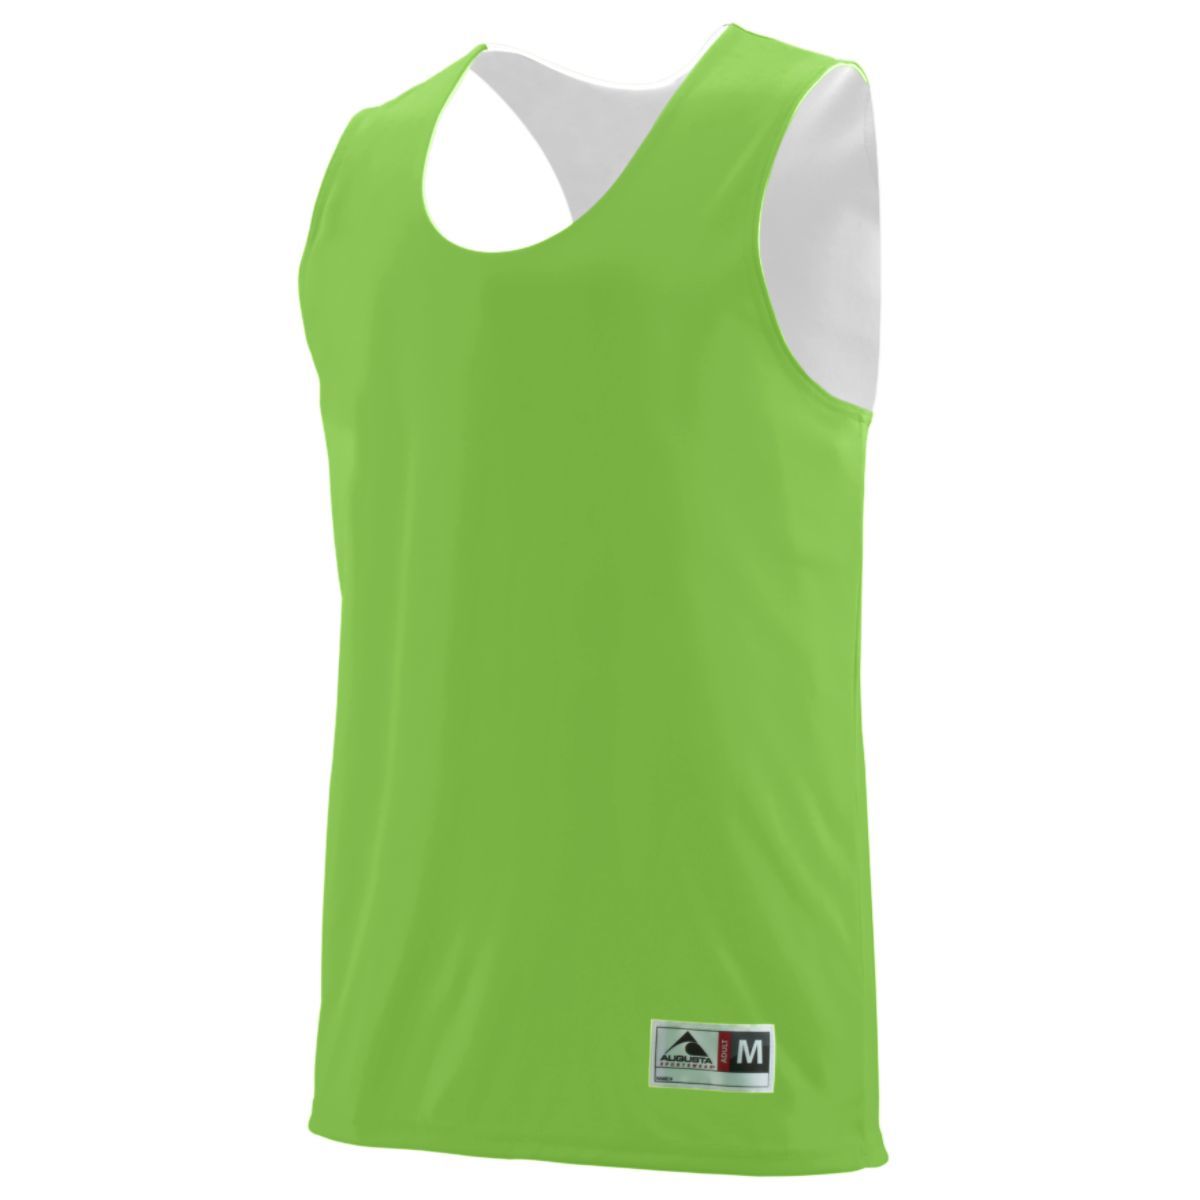 Augusta Sportswear Youth Reversible Wicking Tank in Lime/White  -Part of the Youth, Youth-Tank, Augusta-Products, Basketball, Shirts, All-Sports, All-Sports-1 product lines at KanaleyCreations.com